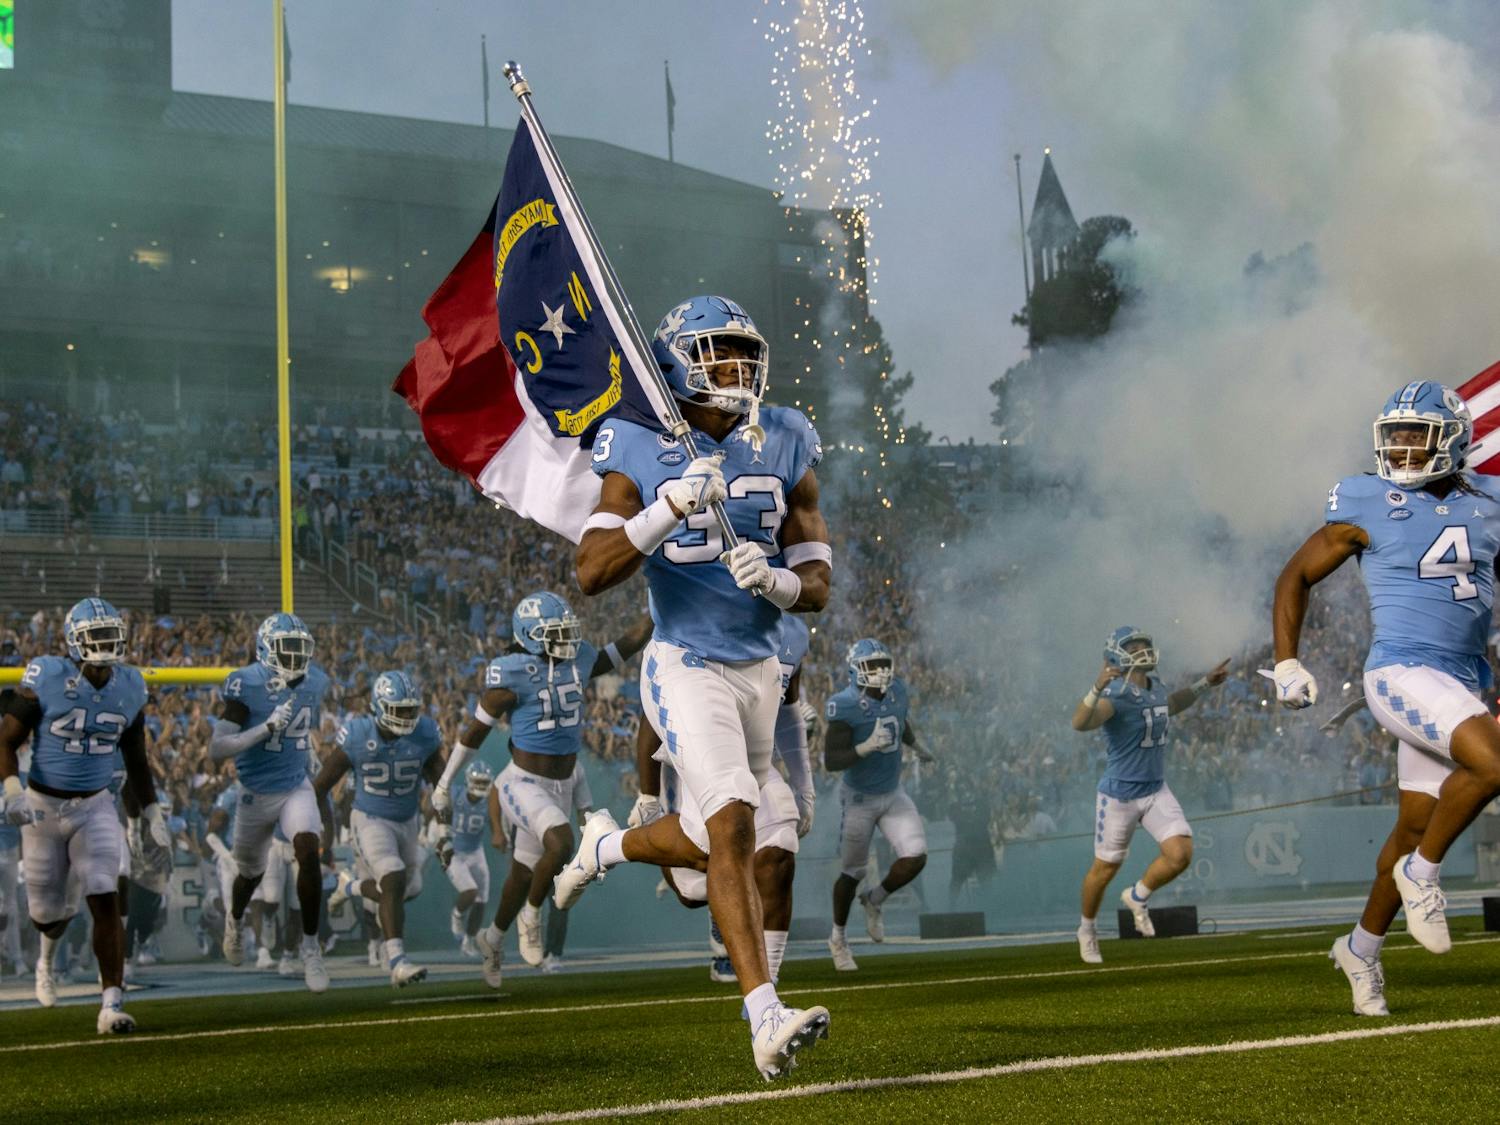 UNC sophomore linebacker Cedric Gray (33) carries in the North Carolina flag before the Tar Heels' home matchup in Kenan Stadium on Saturday, Sept. 11, 2021 against the Georgia State Panthers.